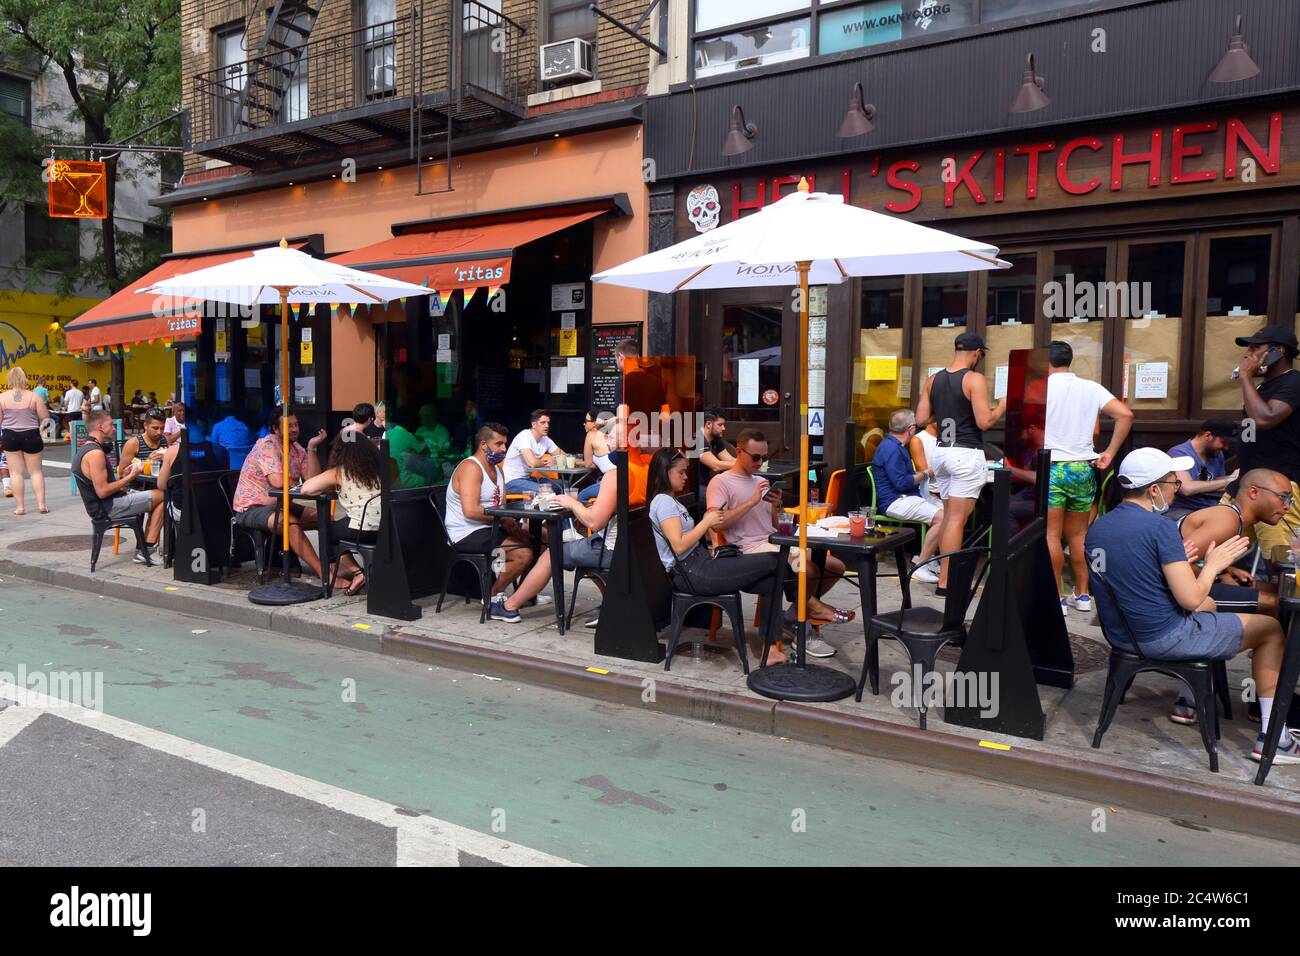 New York, NY. June 28, 2020. People holding drinks and conversation outside 'Ritas on Ninth Avenue in the Hells Kitchen neighborhood. Tables with colorful partitions have been setup on the sidewalk for socially distanced outdoor dining under Phase 2 reopening of New York City. Stock Photo